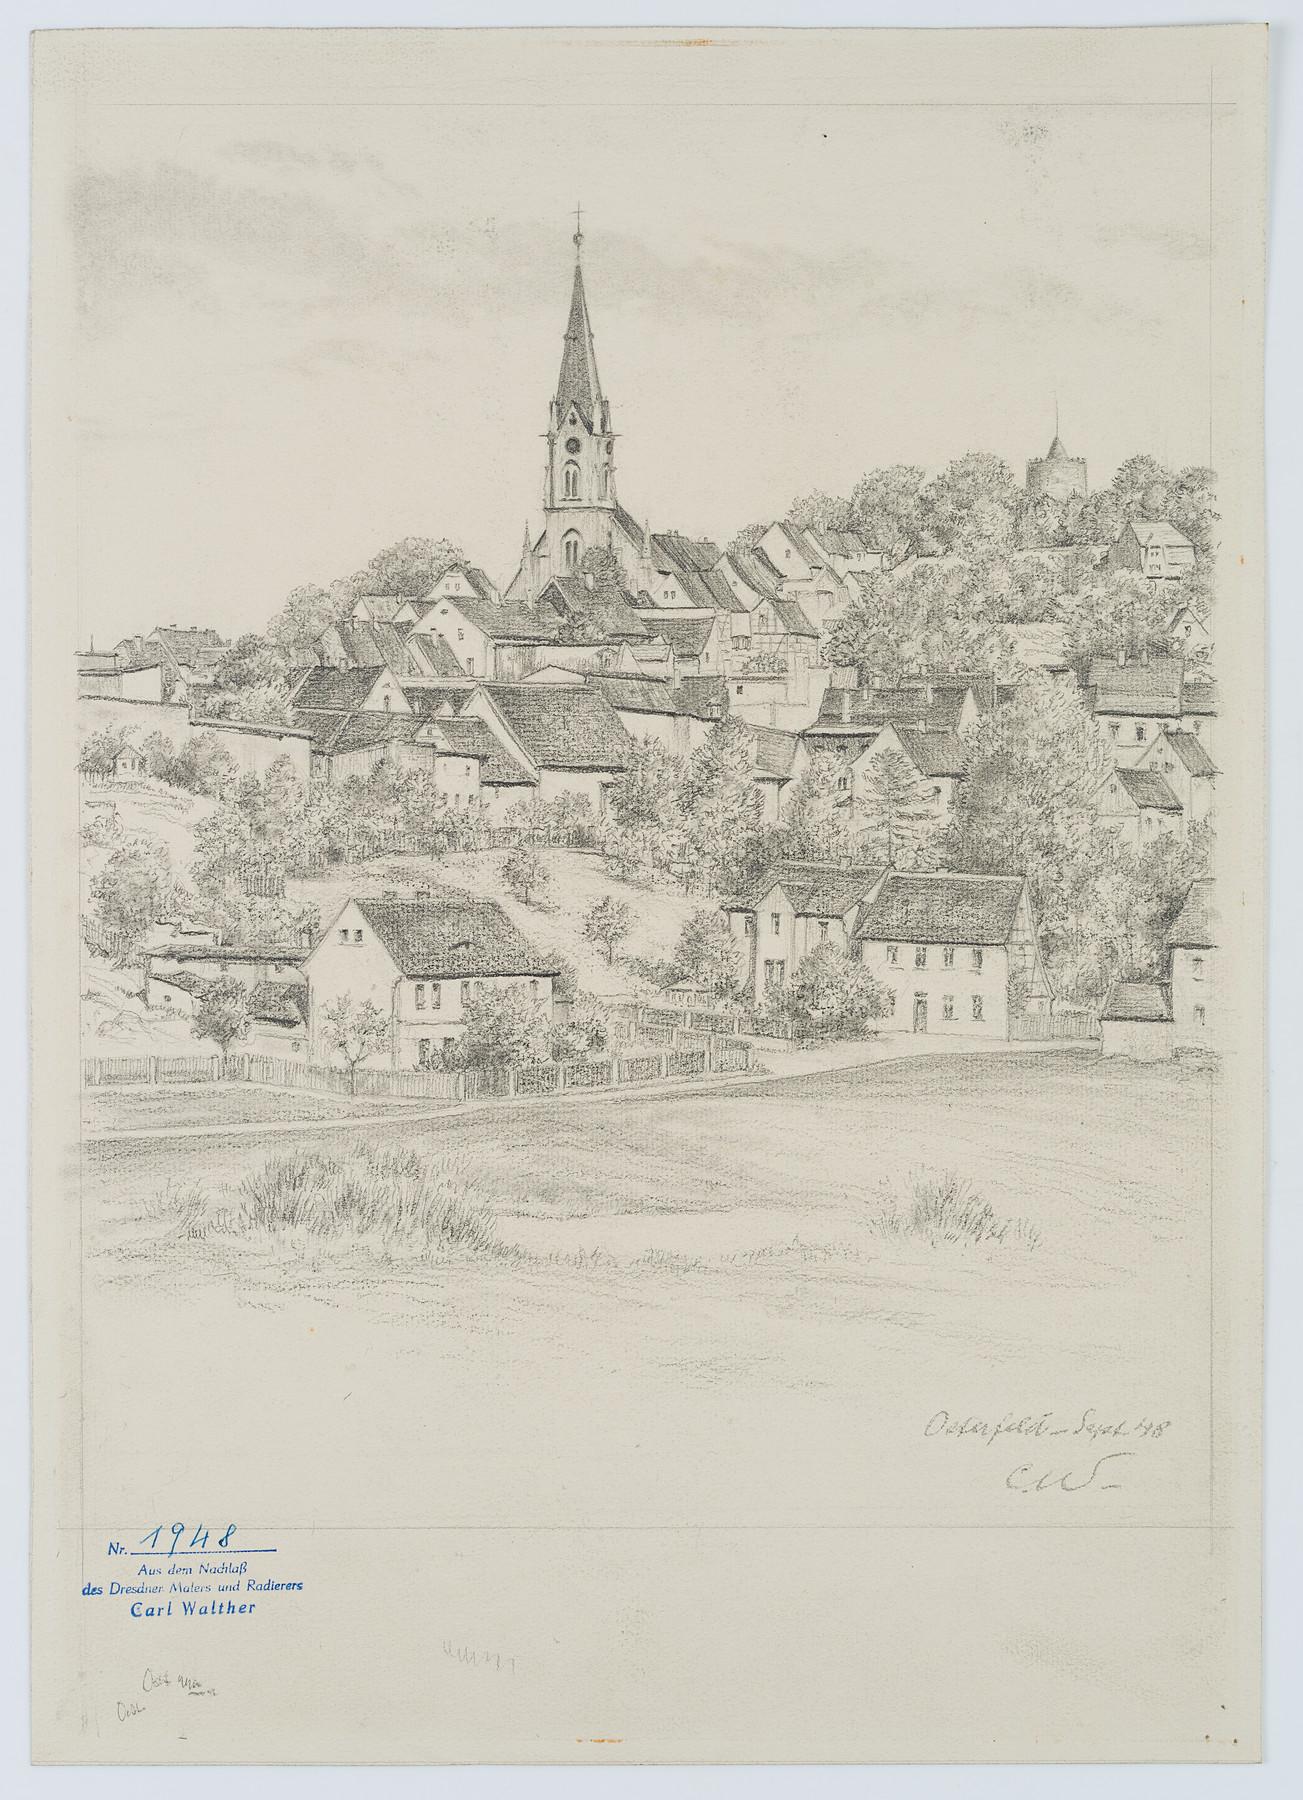 View of Osterfeld with the Luther Church (Burgenlandkreis in Saxony-Anhalt) - Art by Carl August Walther